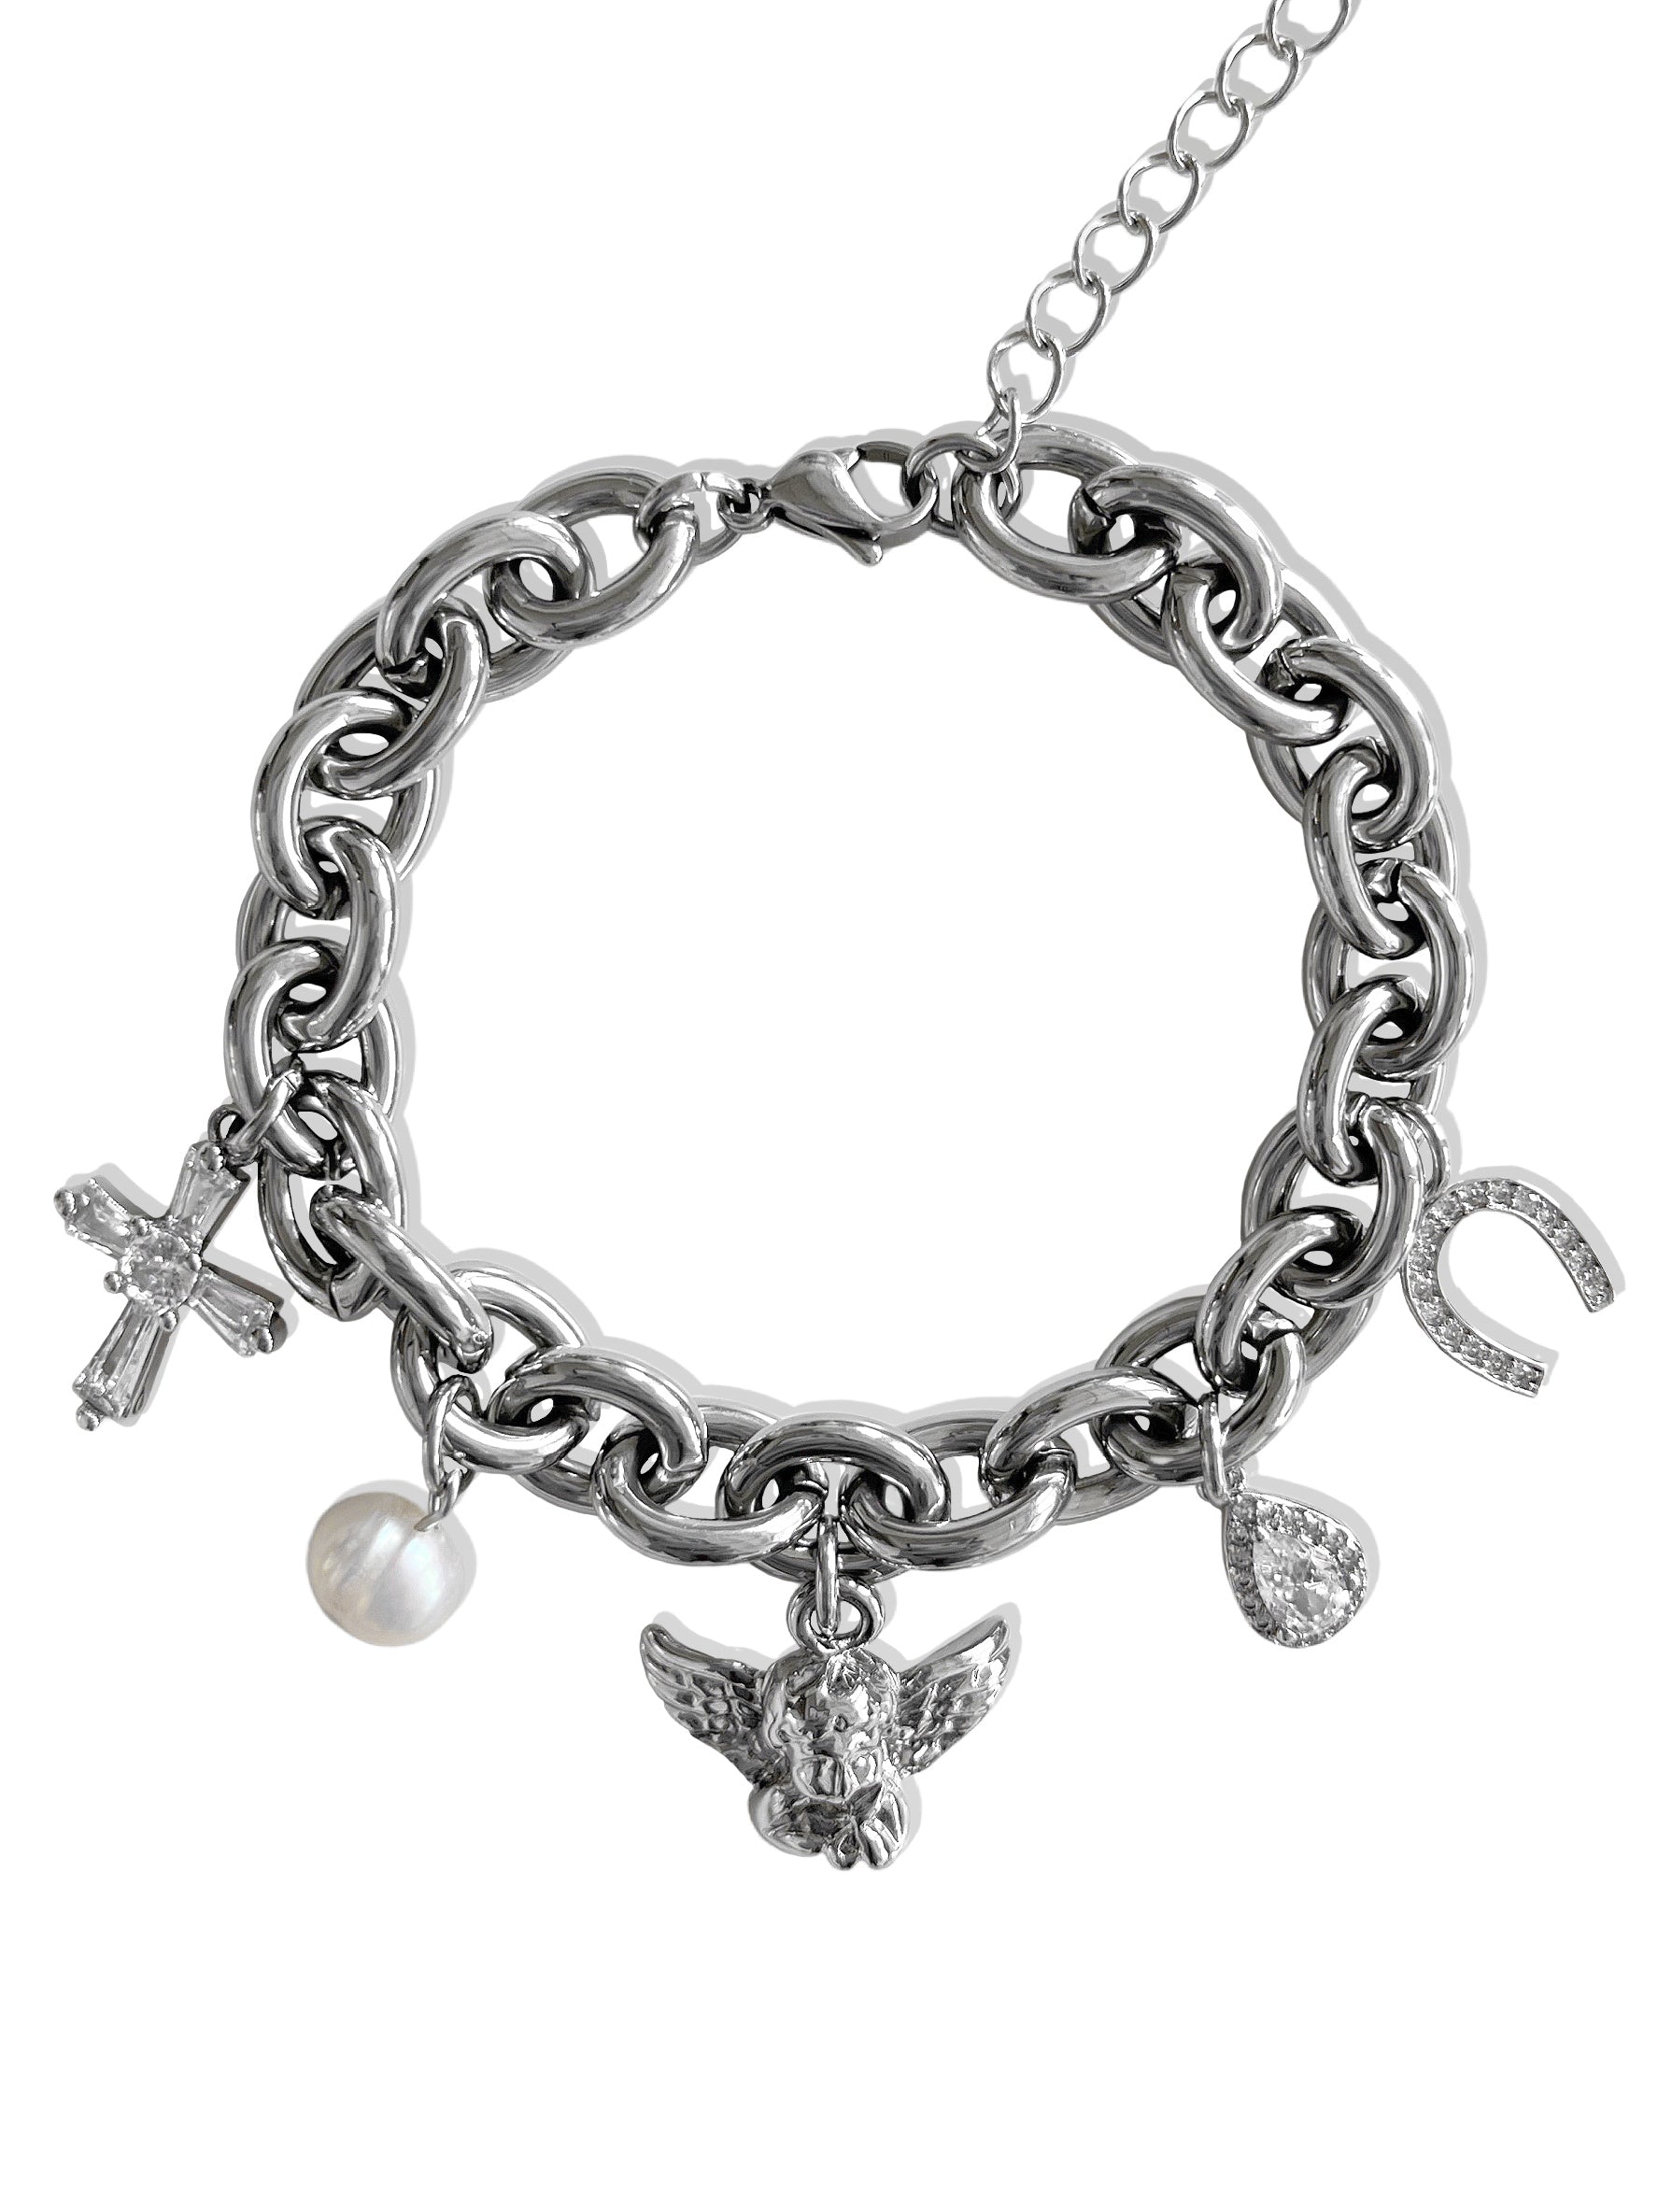 Double Link Charm Bracelet for teens and adults in size 8